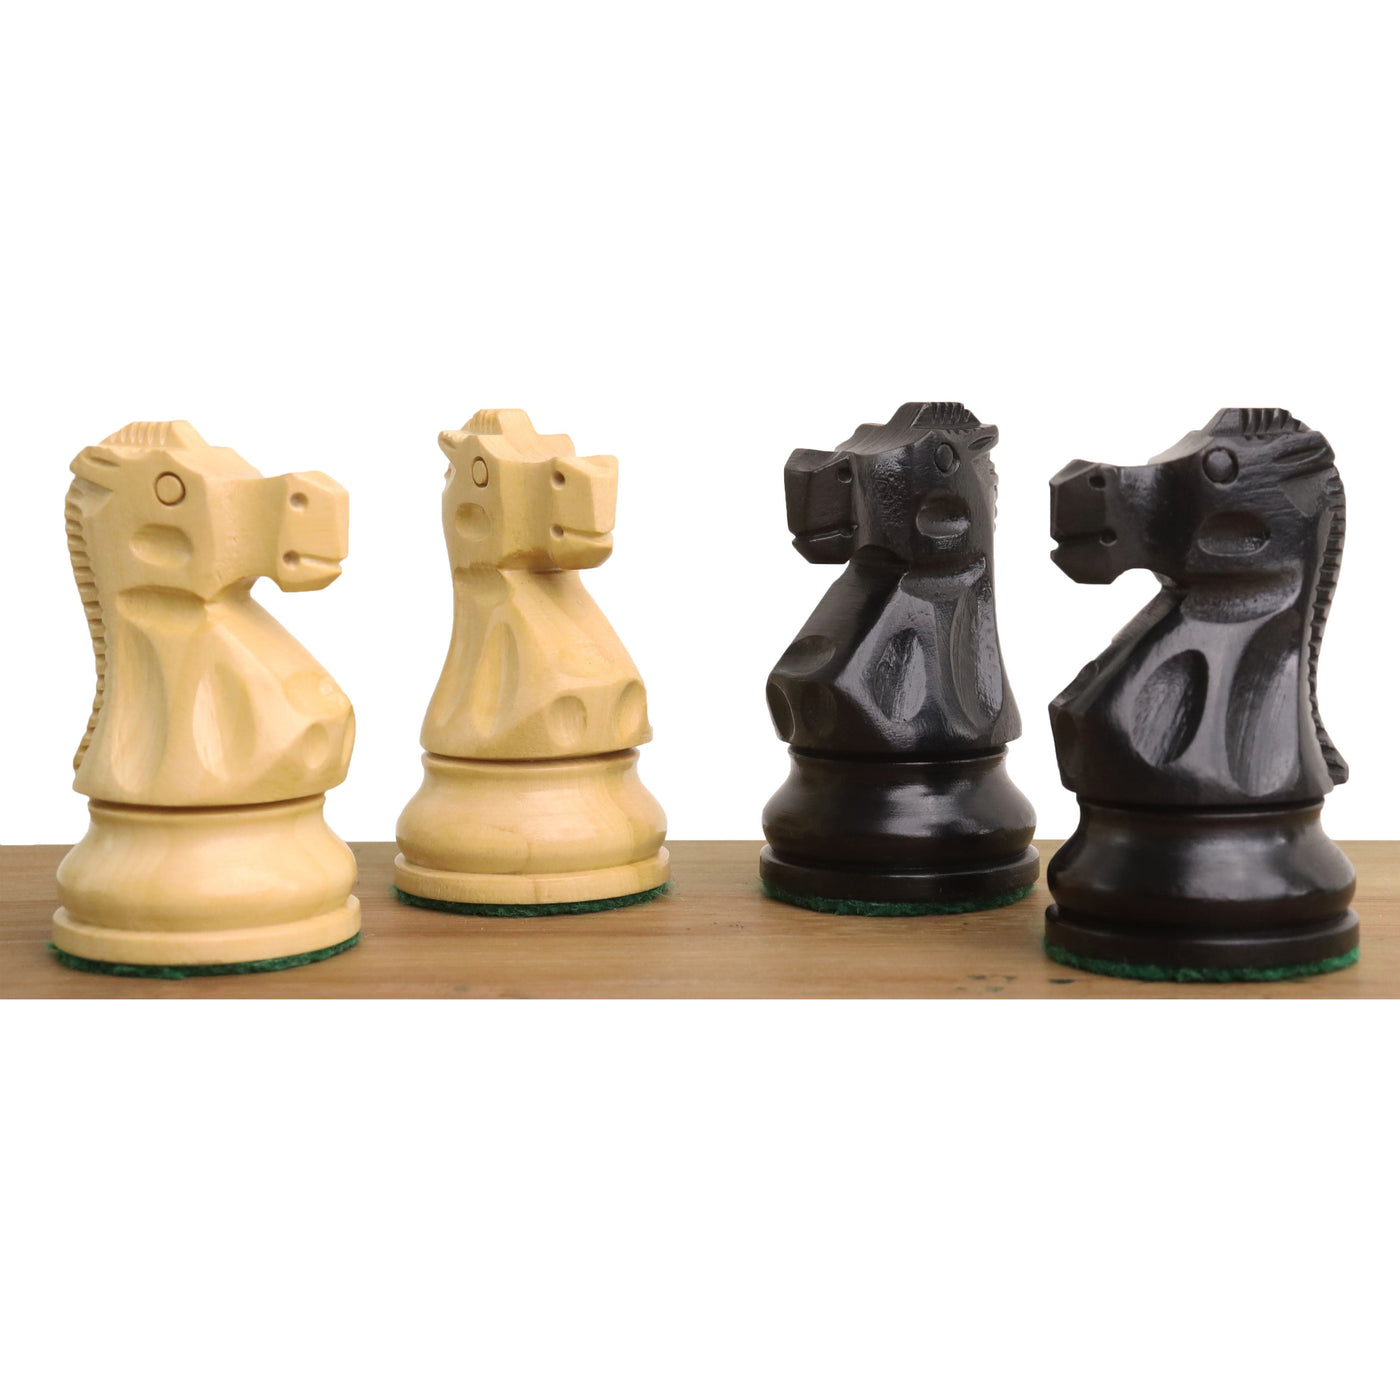 3.25" Reykjavik Series Staunton Chess Set - Chess Pieces Only- Weighted Ebonised Boxwood